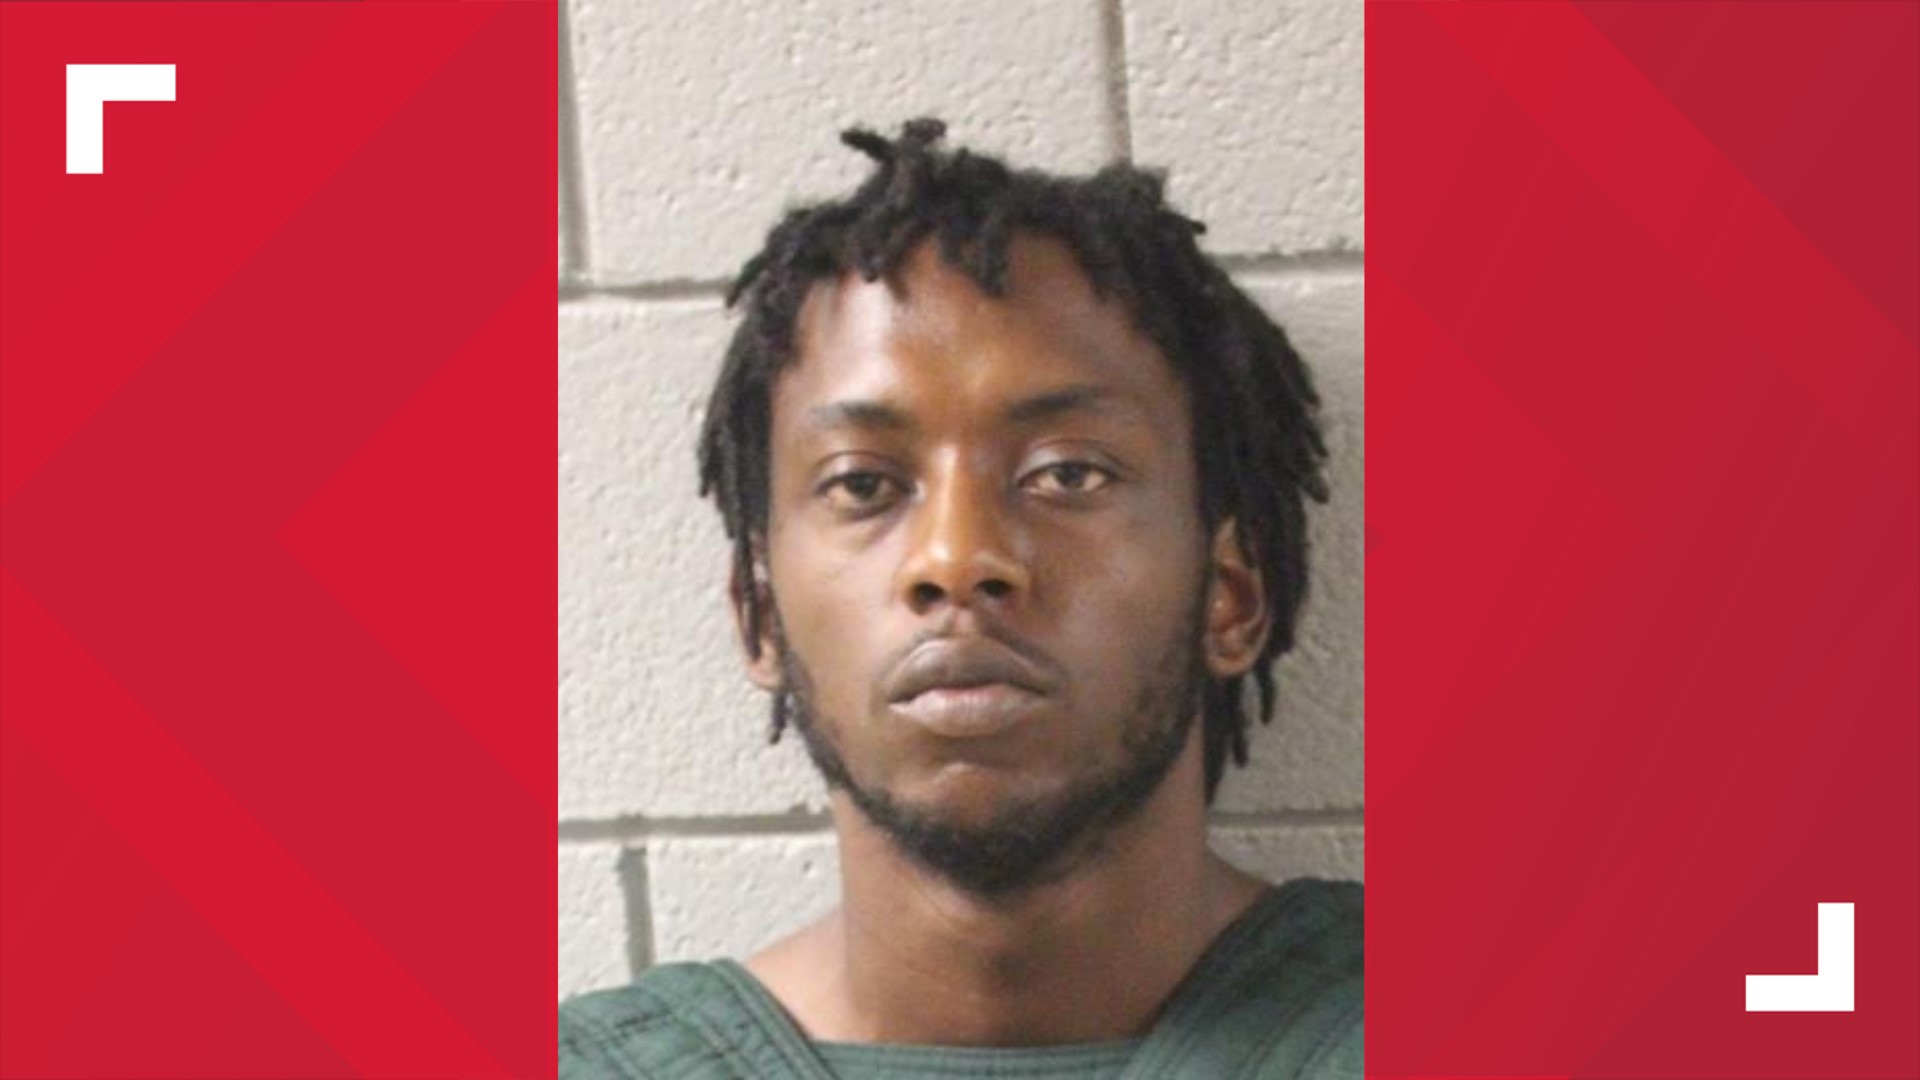 Davone Anderson, 25, is facing multiple charges in connection to the deaths of two women and an unborn child in Carlisle.